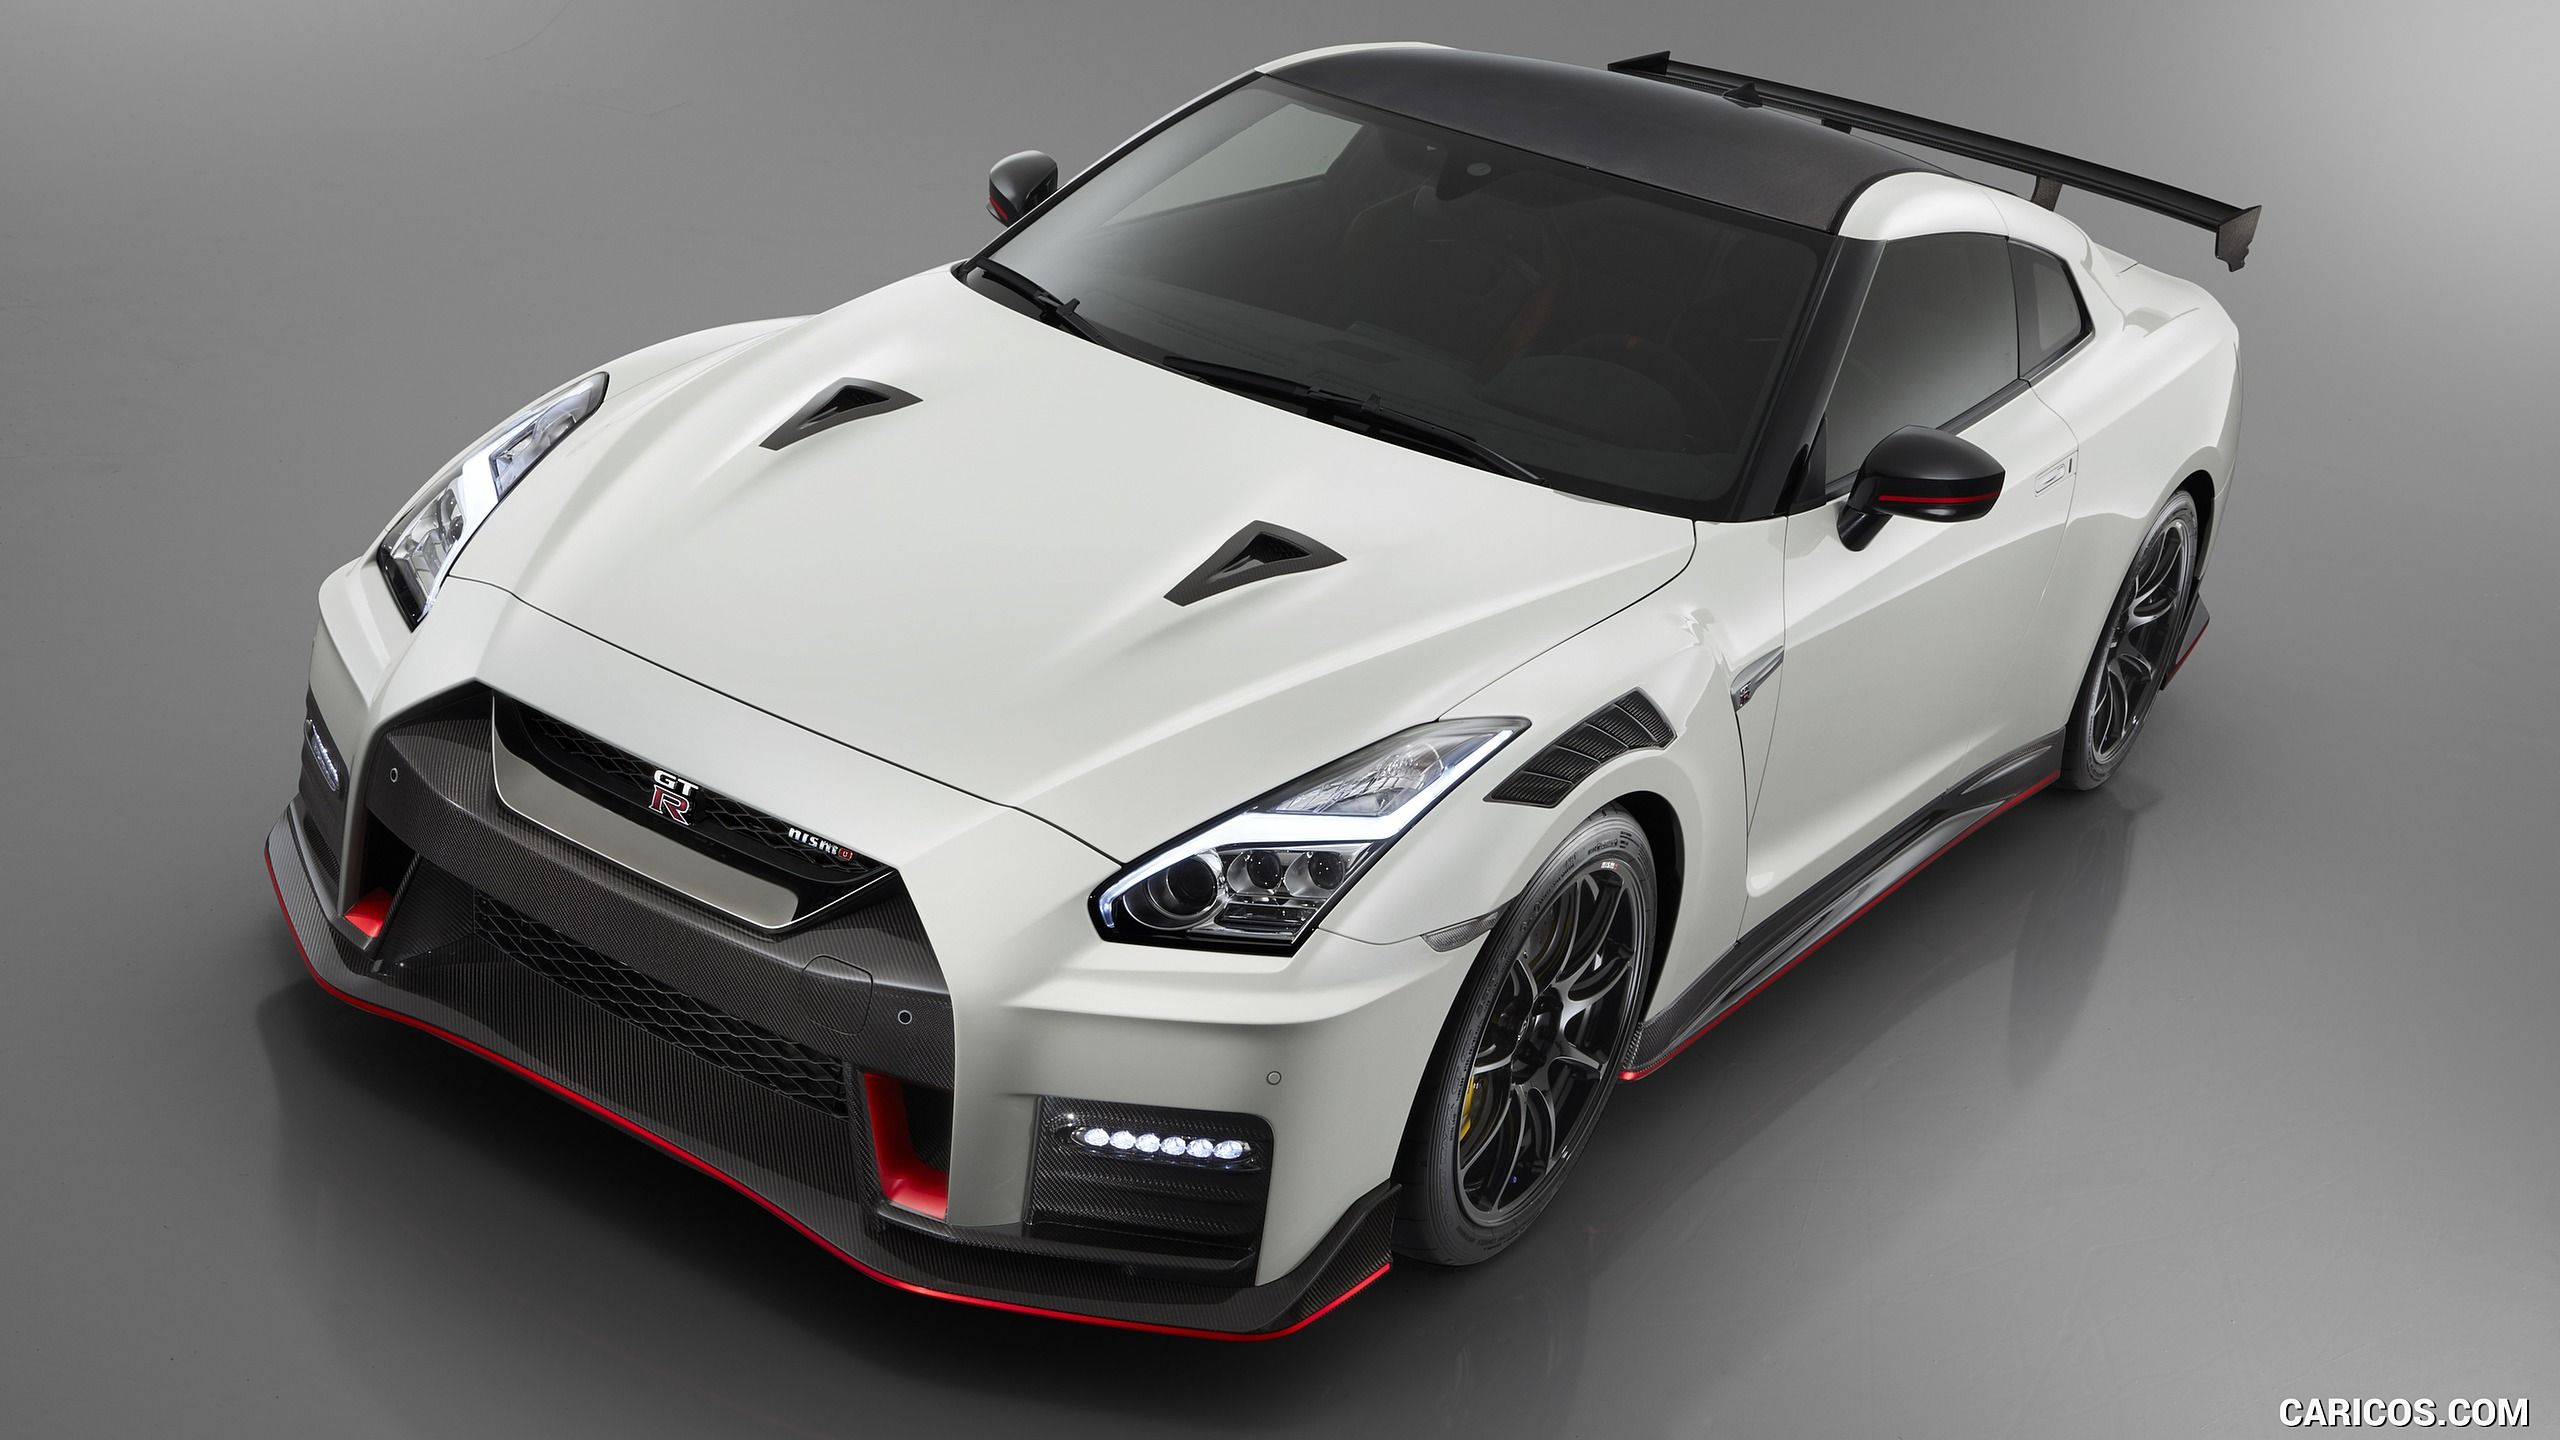 2560x1440 Nissan GT-R Nismo Wallpapers Top Free Nissan GT-R Nismo Backgrounds